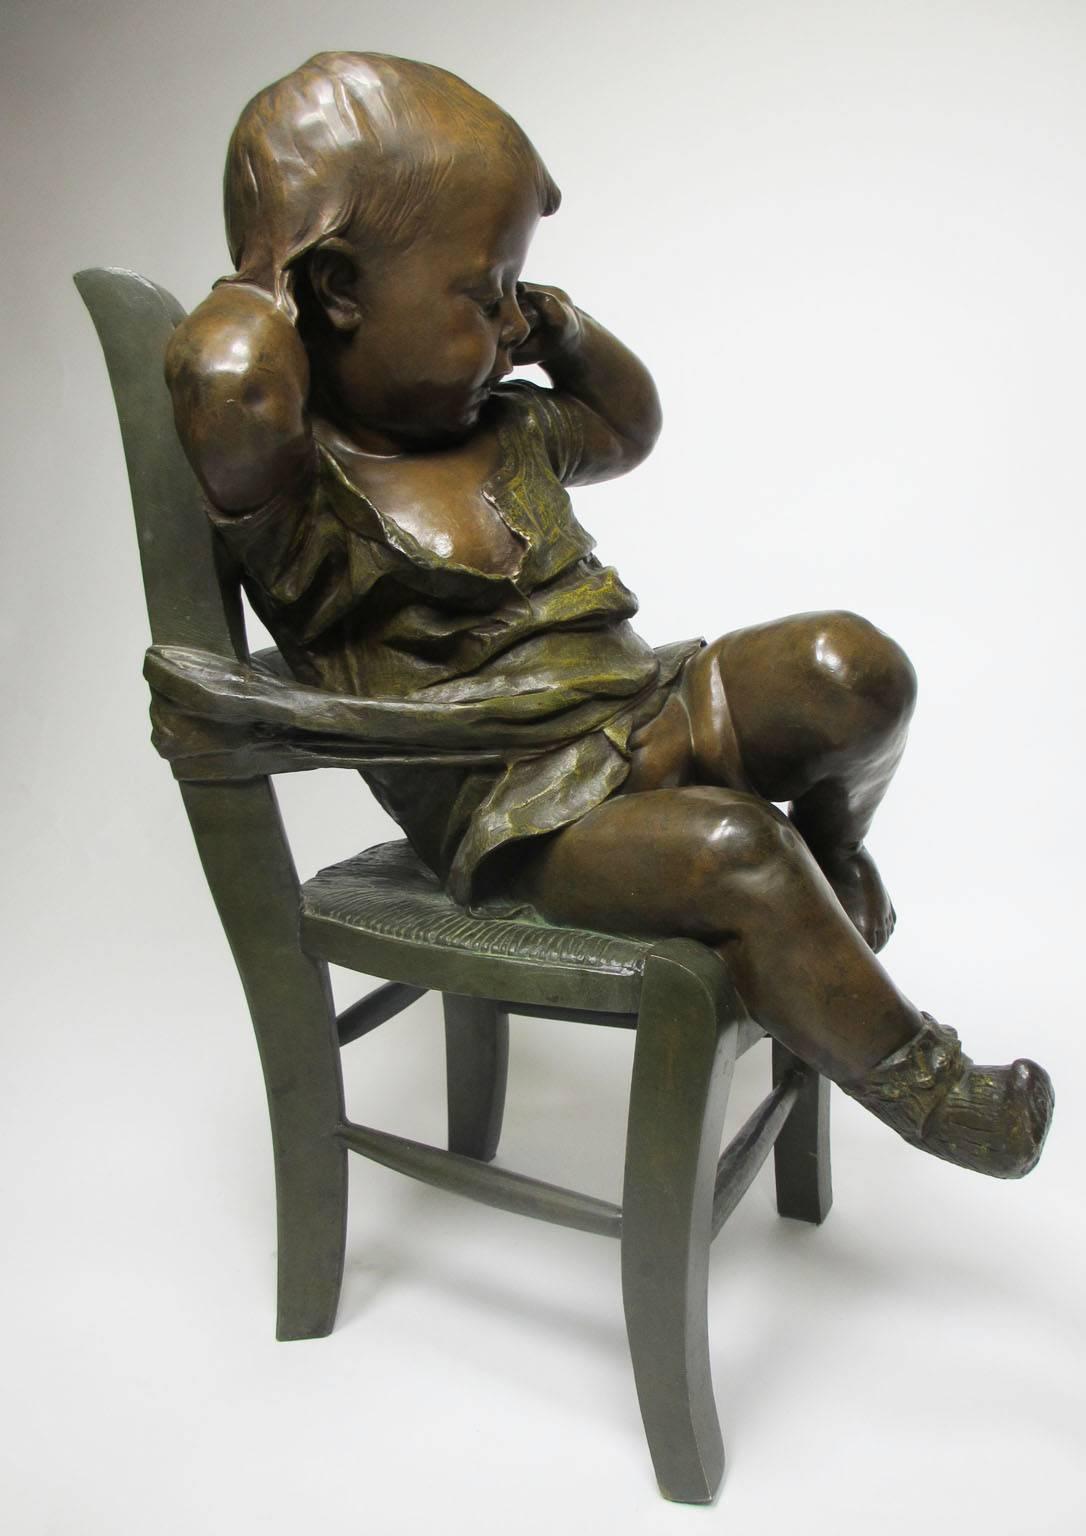 French 19th Century Patinated Bronze Sculpture an Infant Girl Seated in a Chair 2